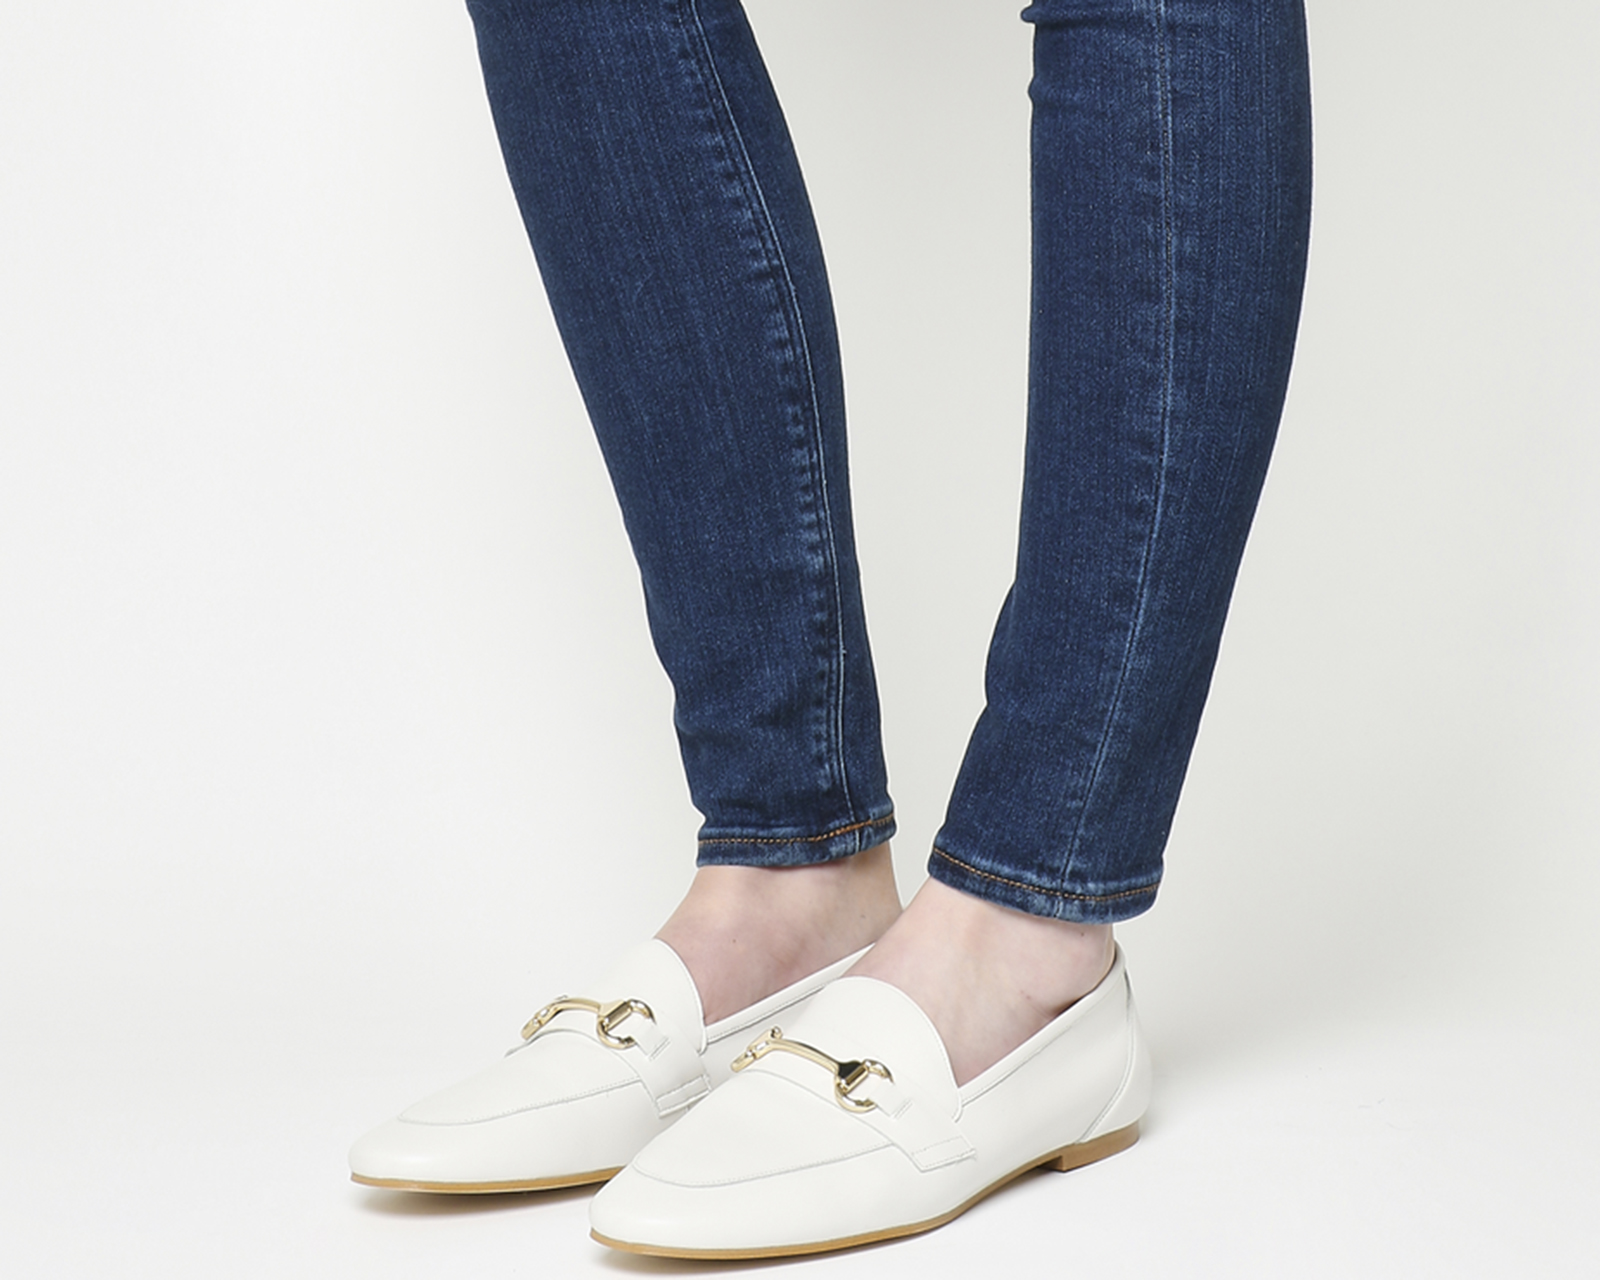 OFFICEDestiny Trim LoafersOff White Leather